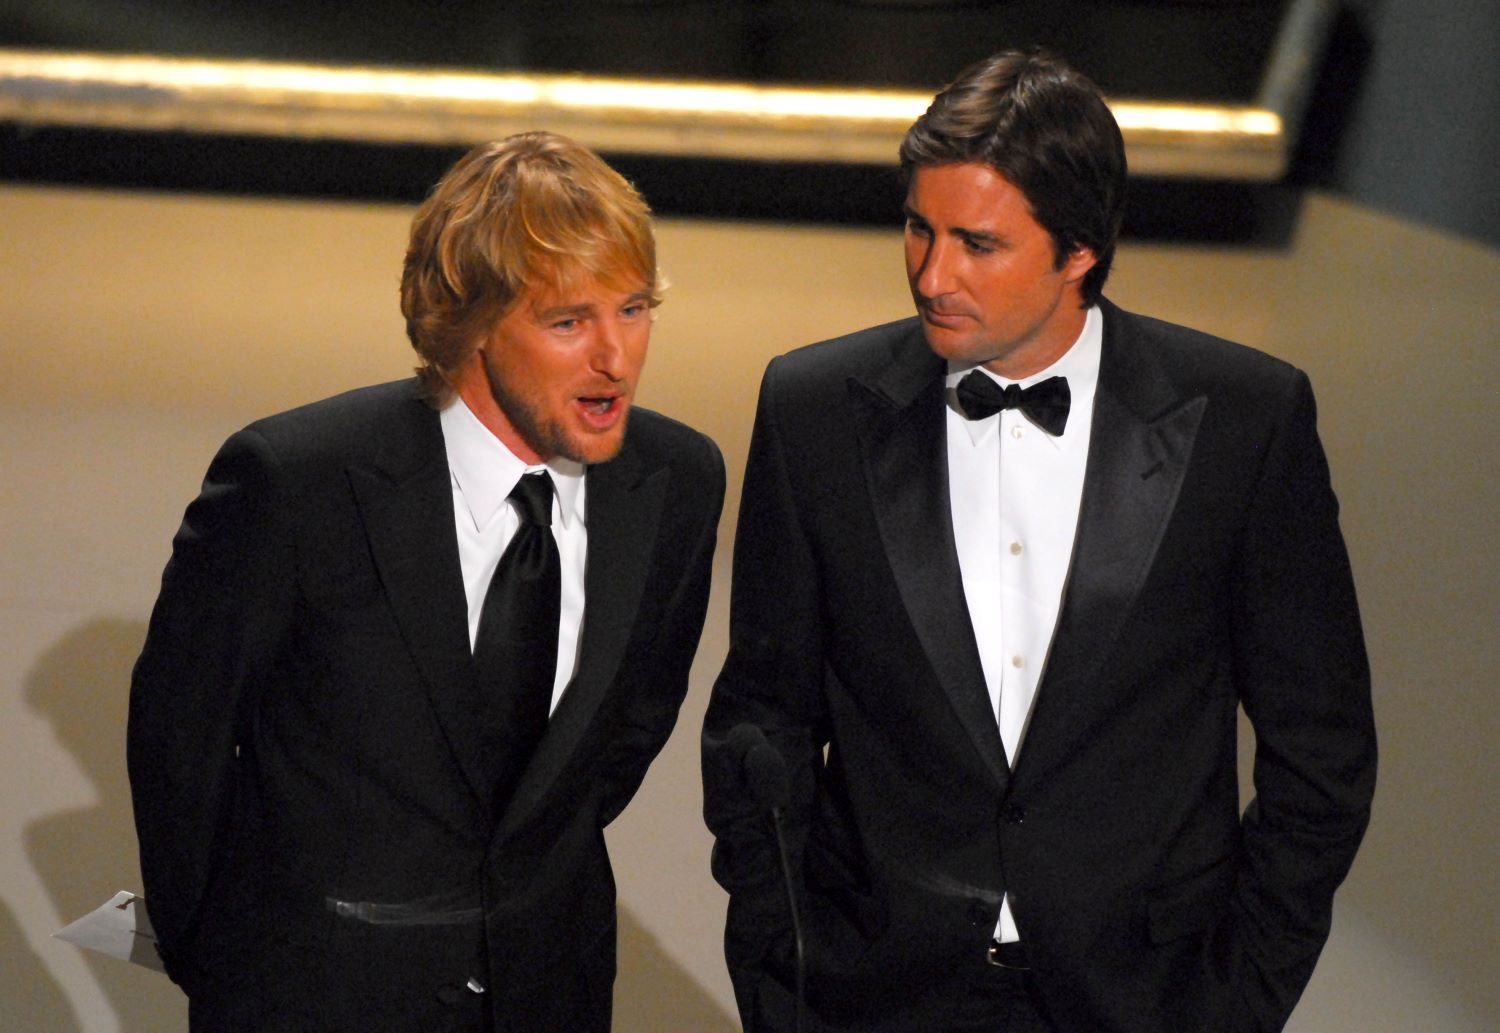 L-R: Owen Wilson and Luke Wilson in suits with Owen speaking into a microphone